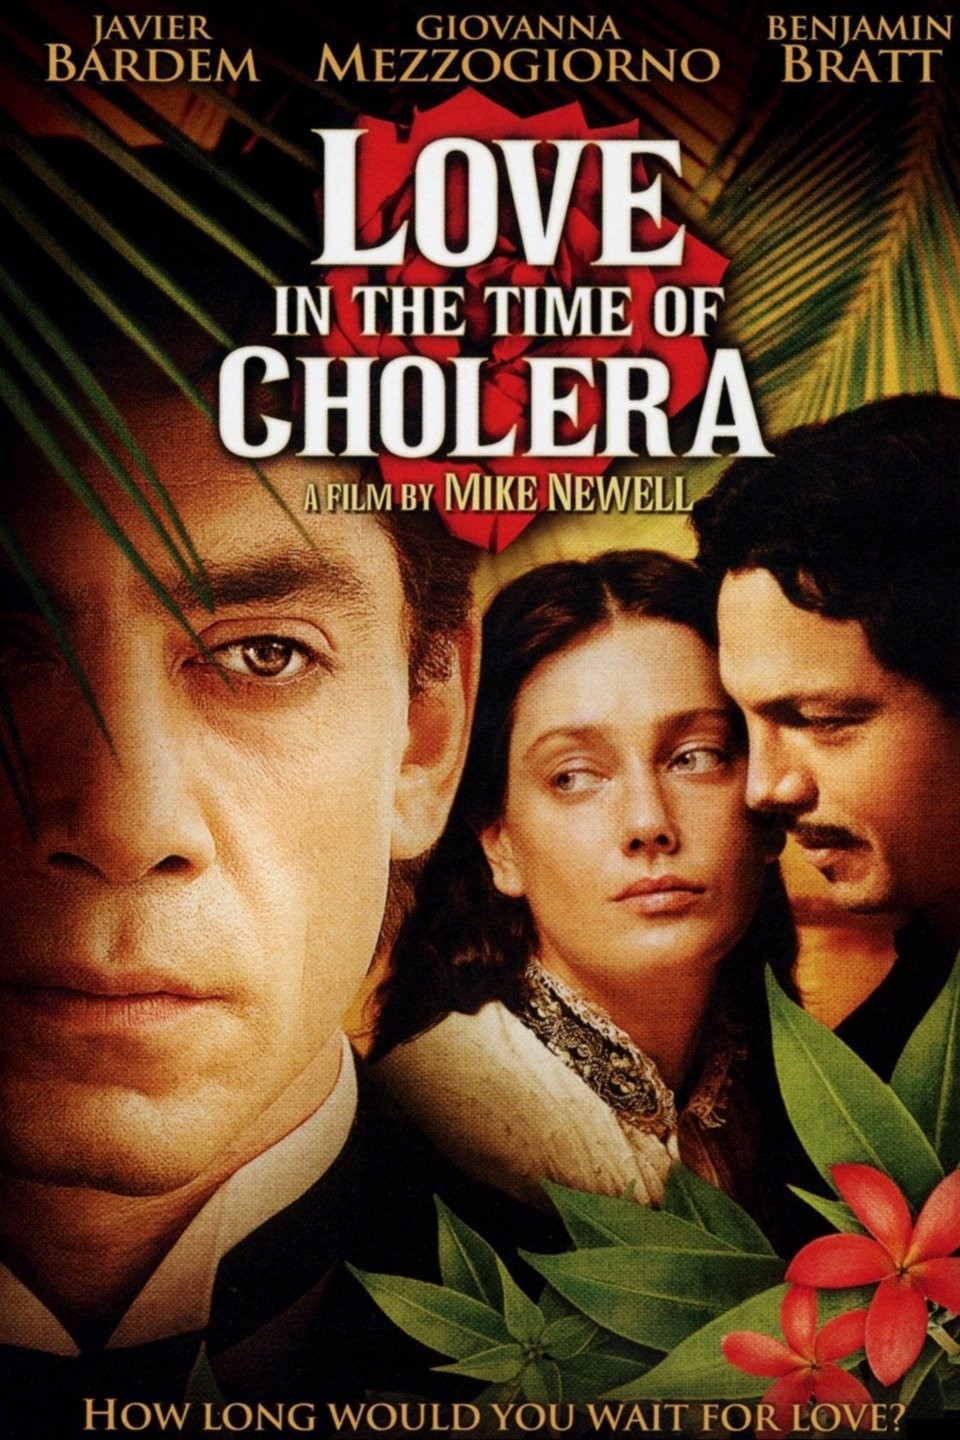 Love in the time of cholera without sex scenes